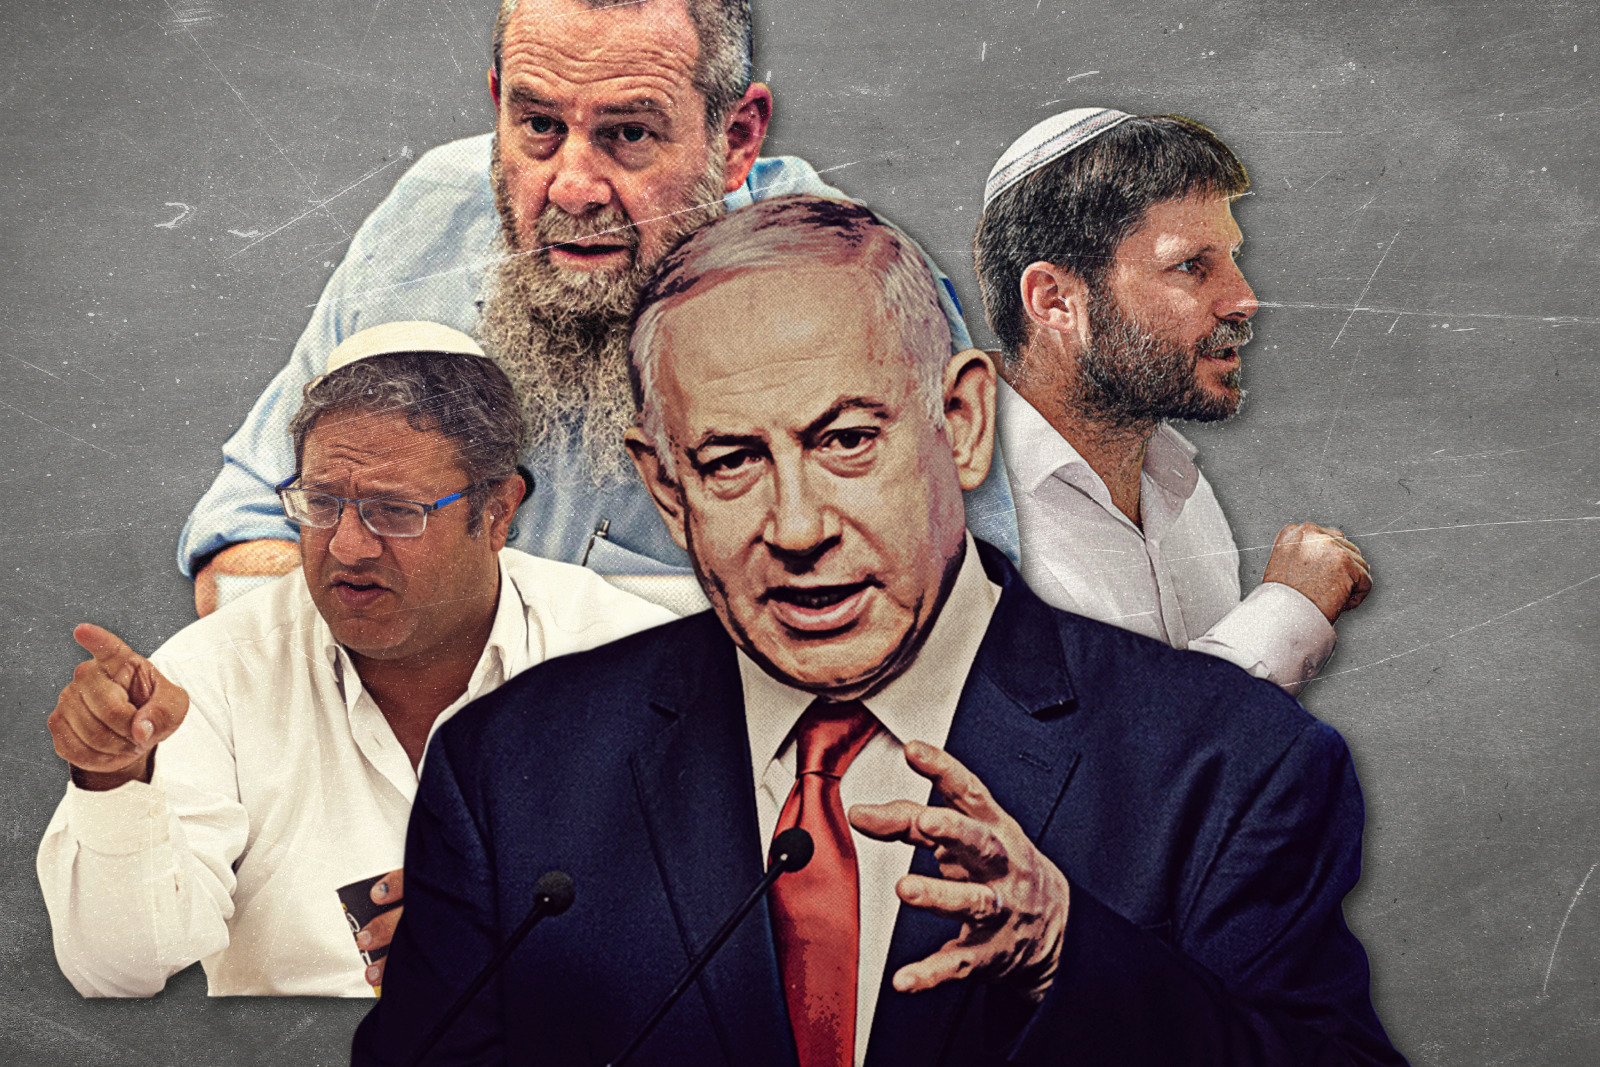 Benjamin Netanyahu has assembled an extremely far-right governing coalition